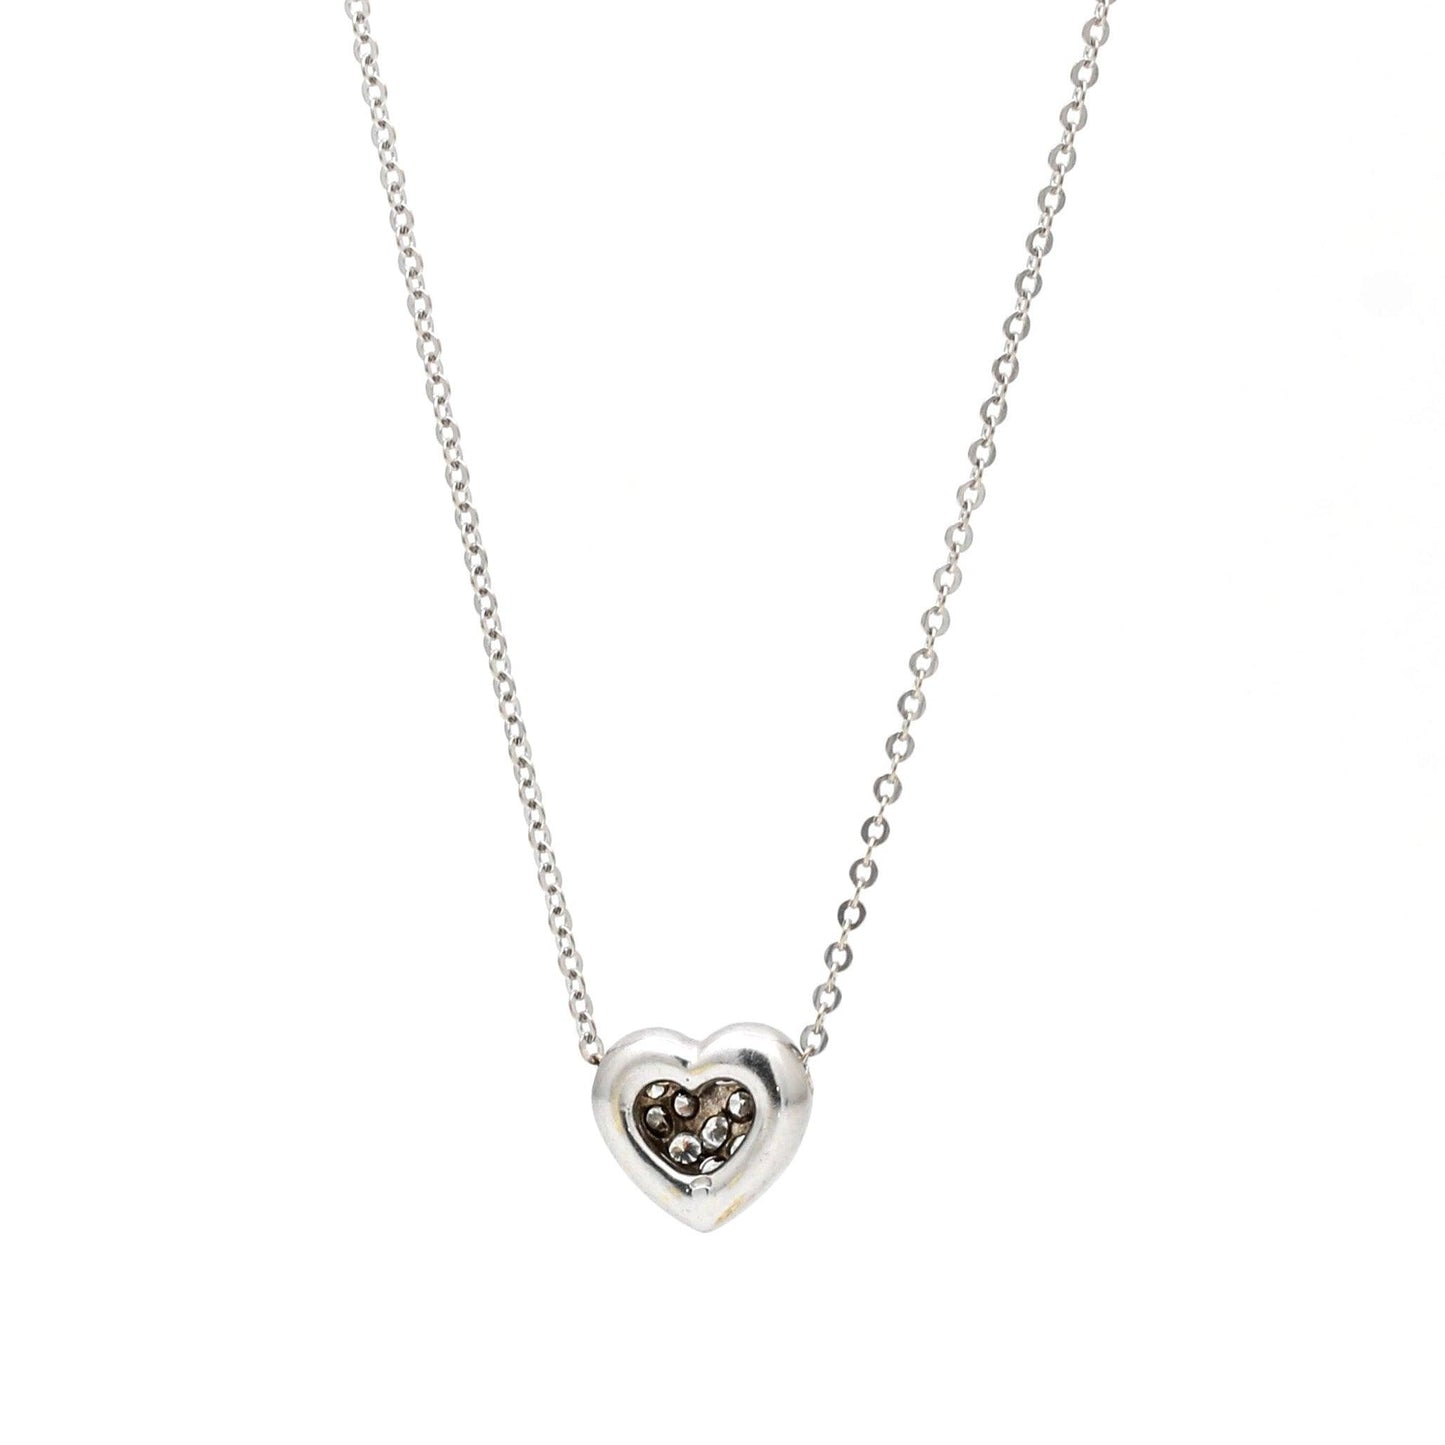 Women's Pave Diamond Heart Pendant Necklace in 14k White Gold - 31 Jewels Inc.